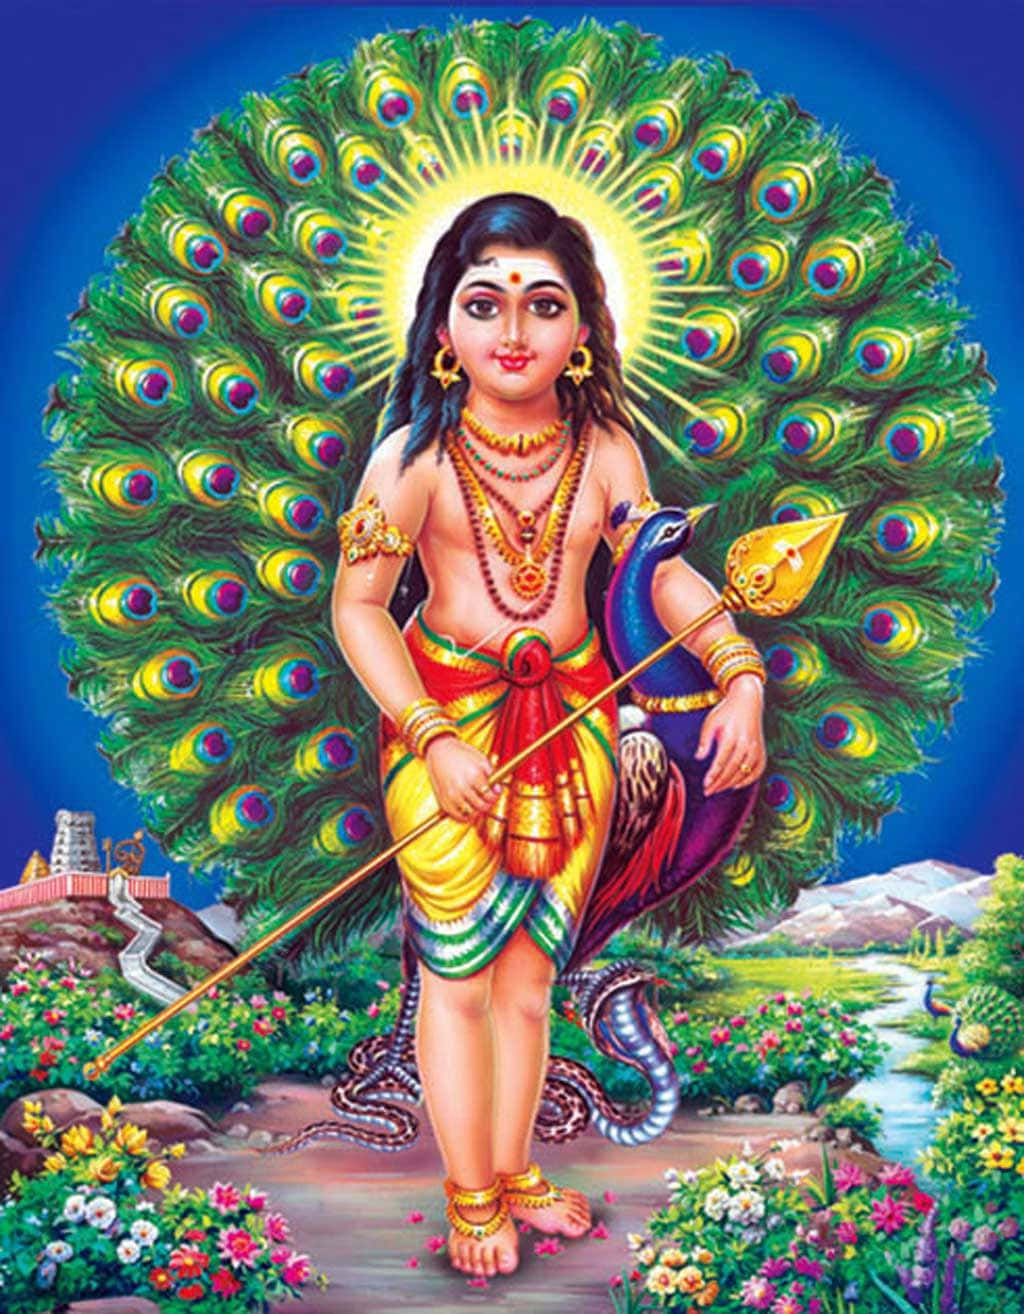 The Divine Lord Murugan, God of War and Victory